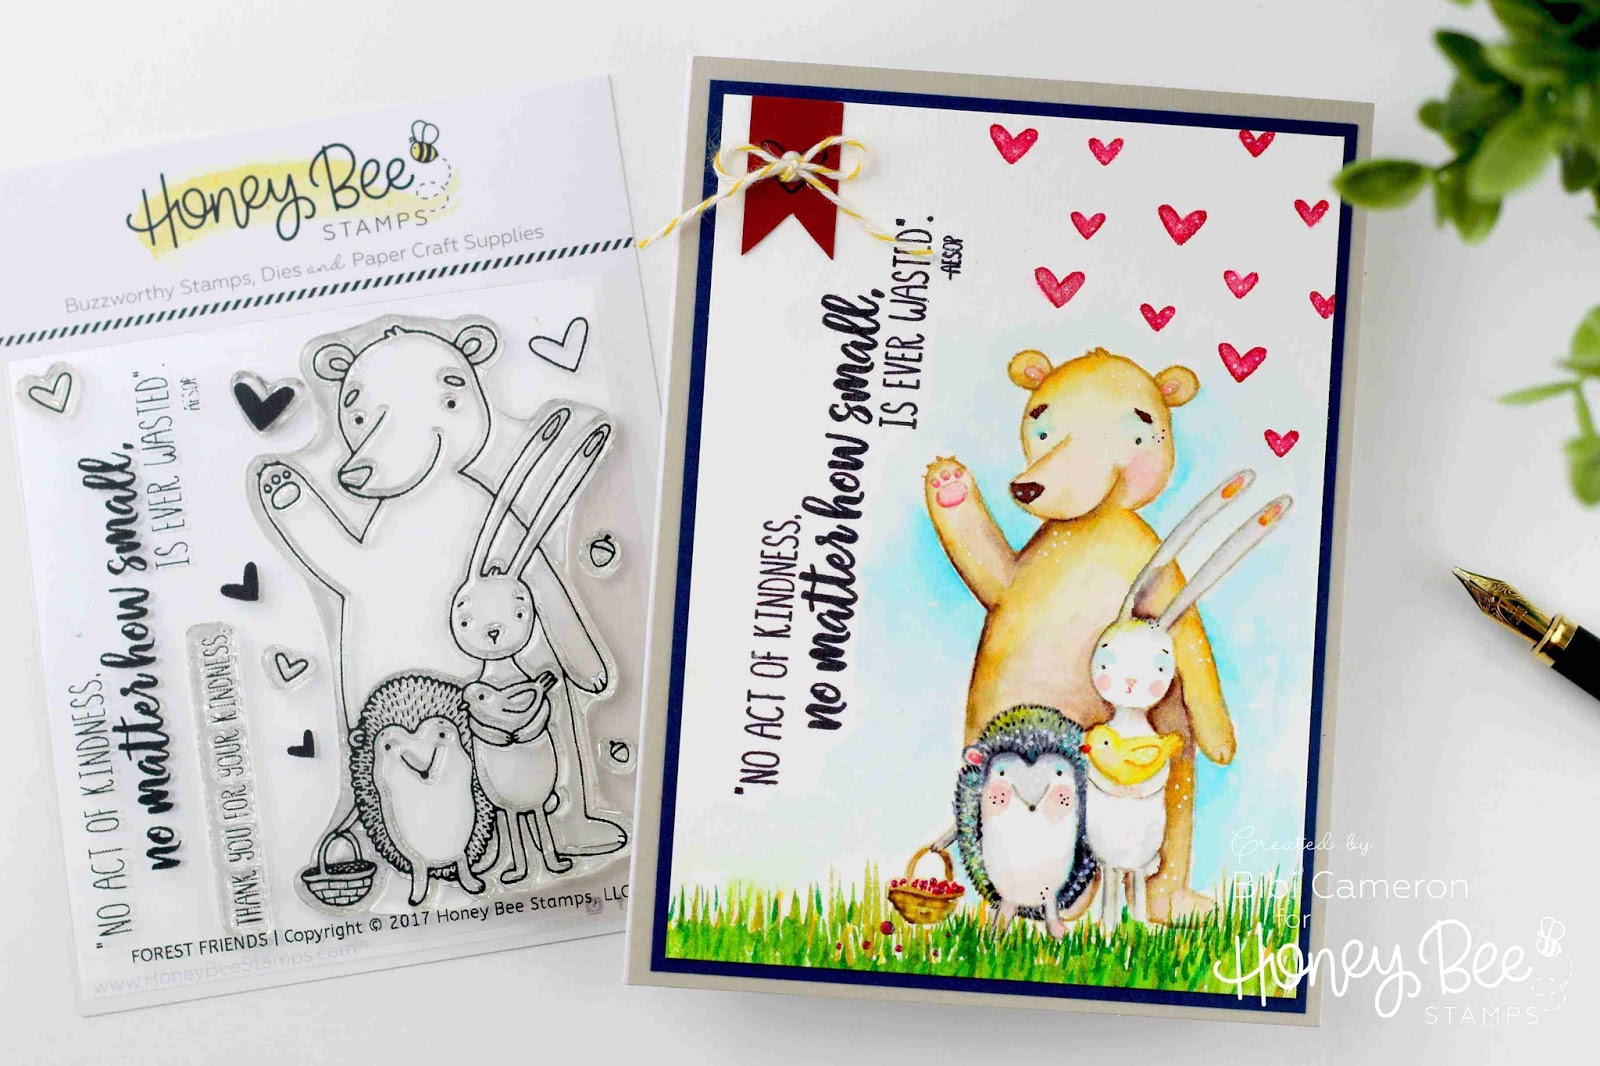 No act of Kindness, no matter how small, is ever wasted| Honey Bee Stamps